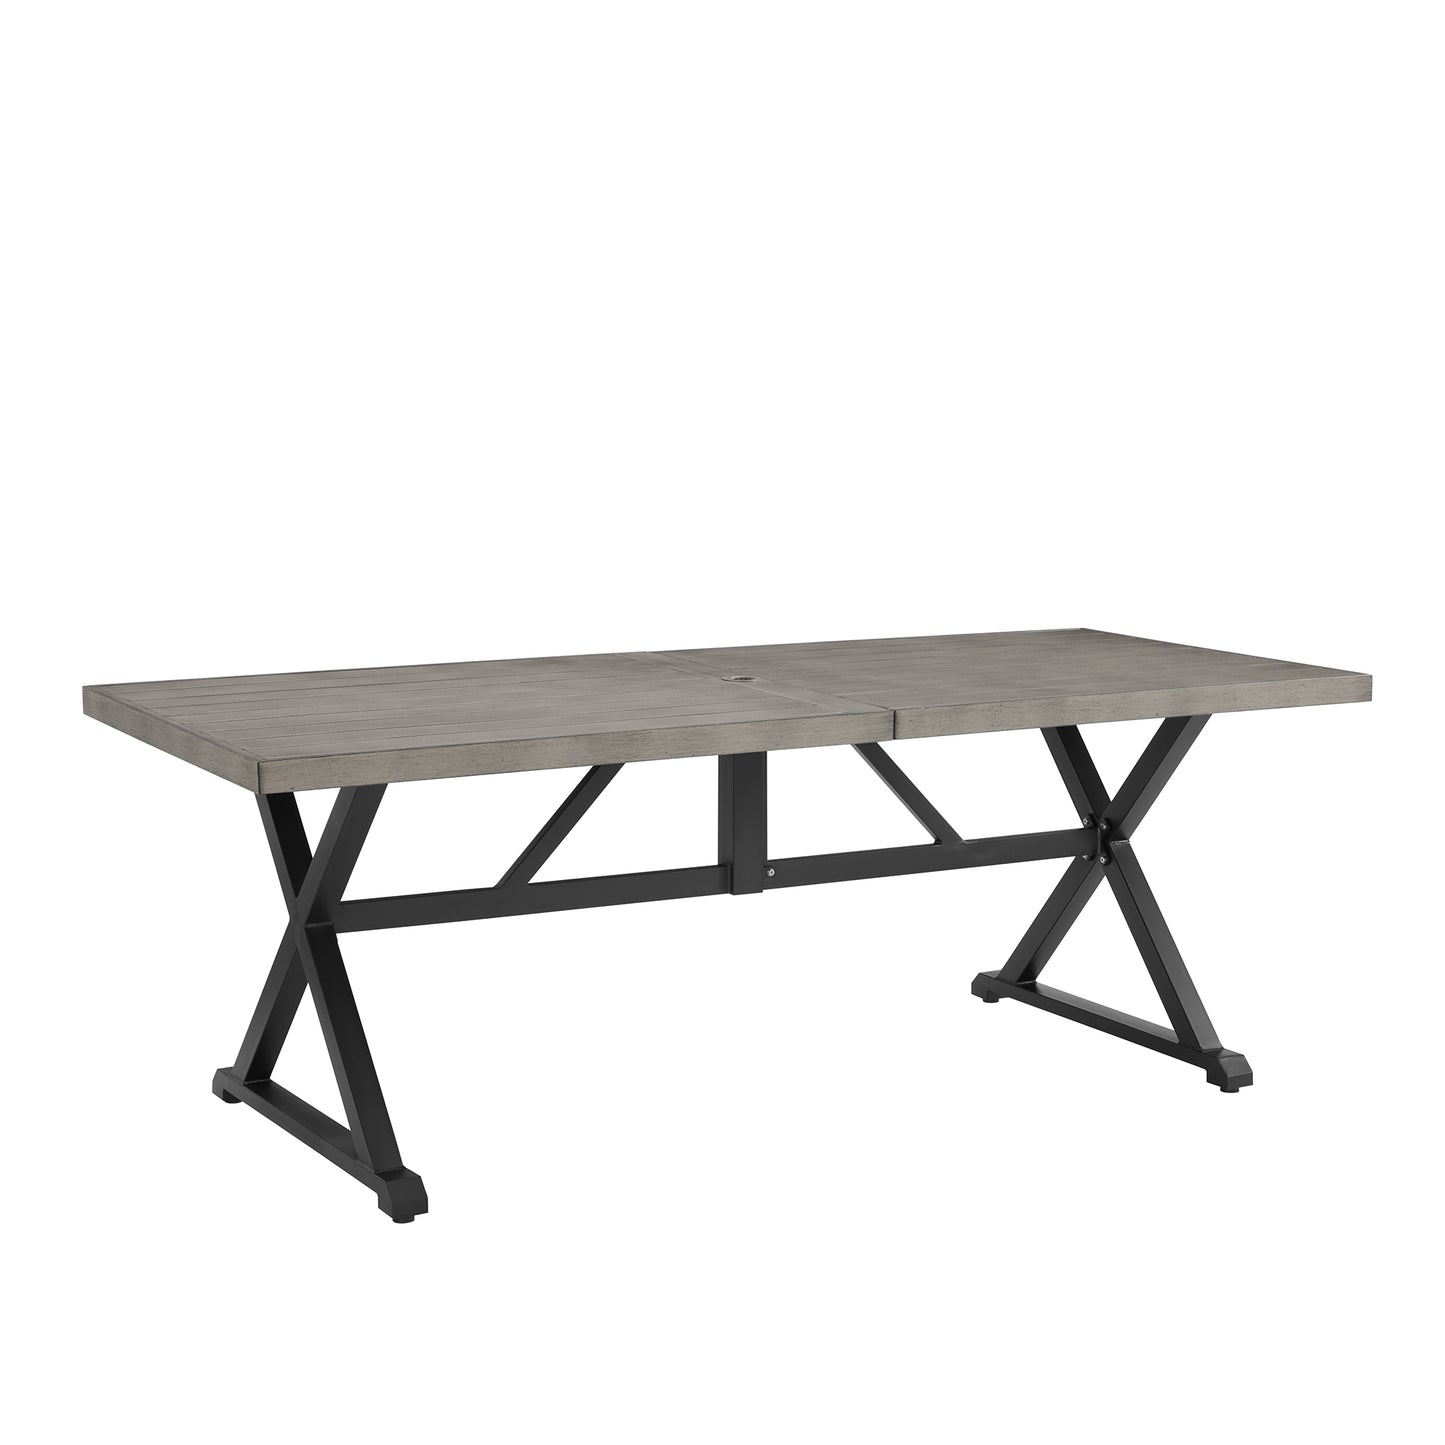 82.5” Outdoor Aluminum Rectangular Dining Table with 1.69” Umbrella Hole for 6 Person